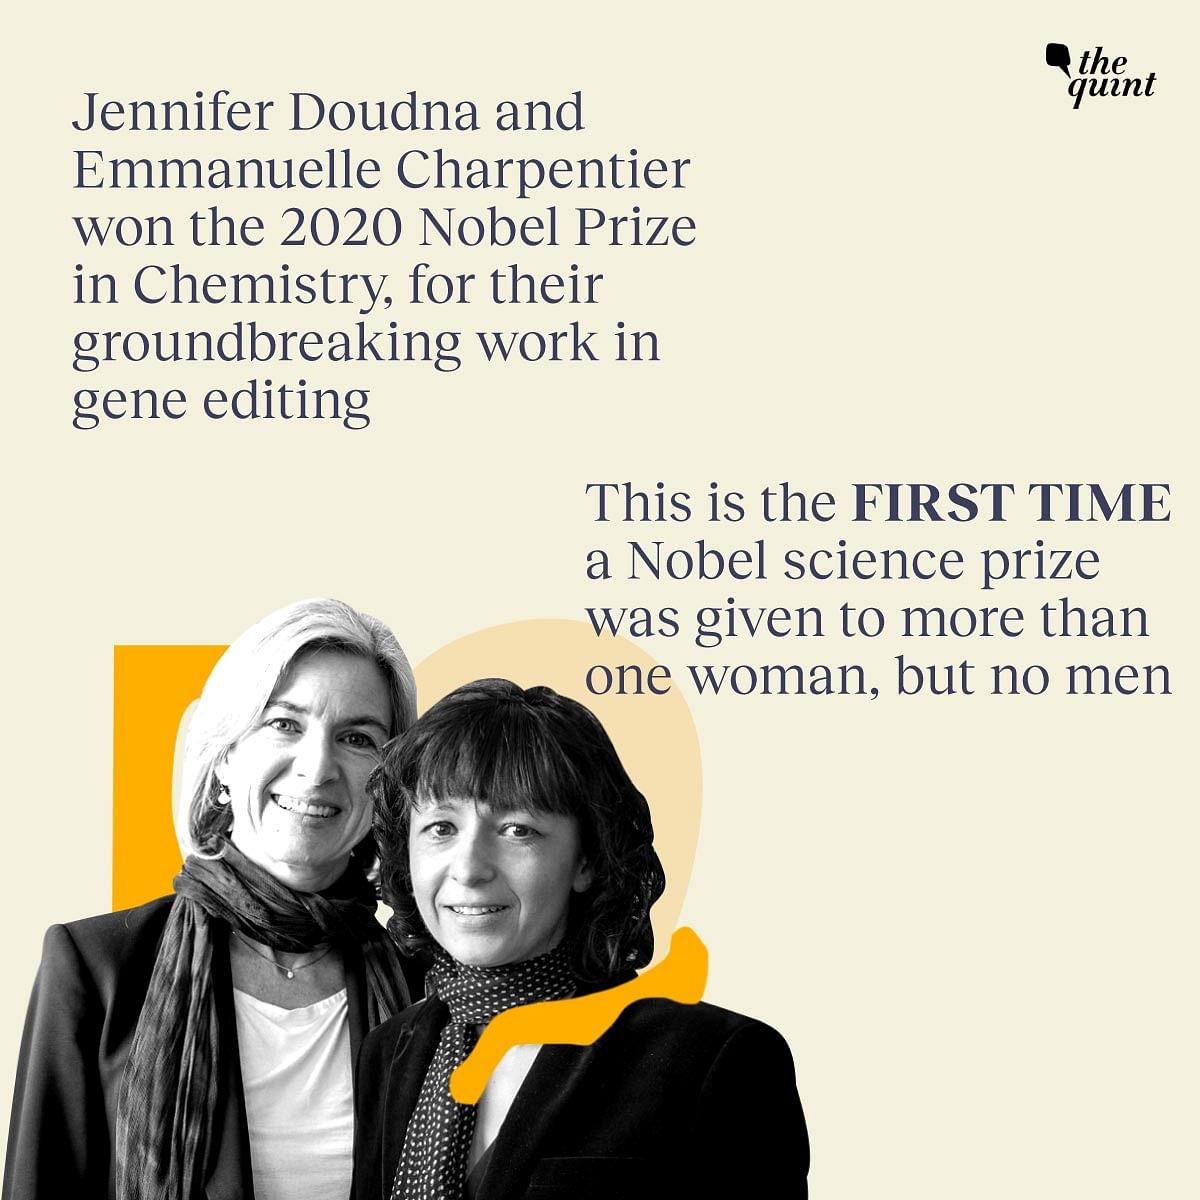 2020 became only the second year in which science prizes were awarded to more than one woman.